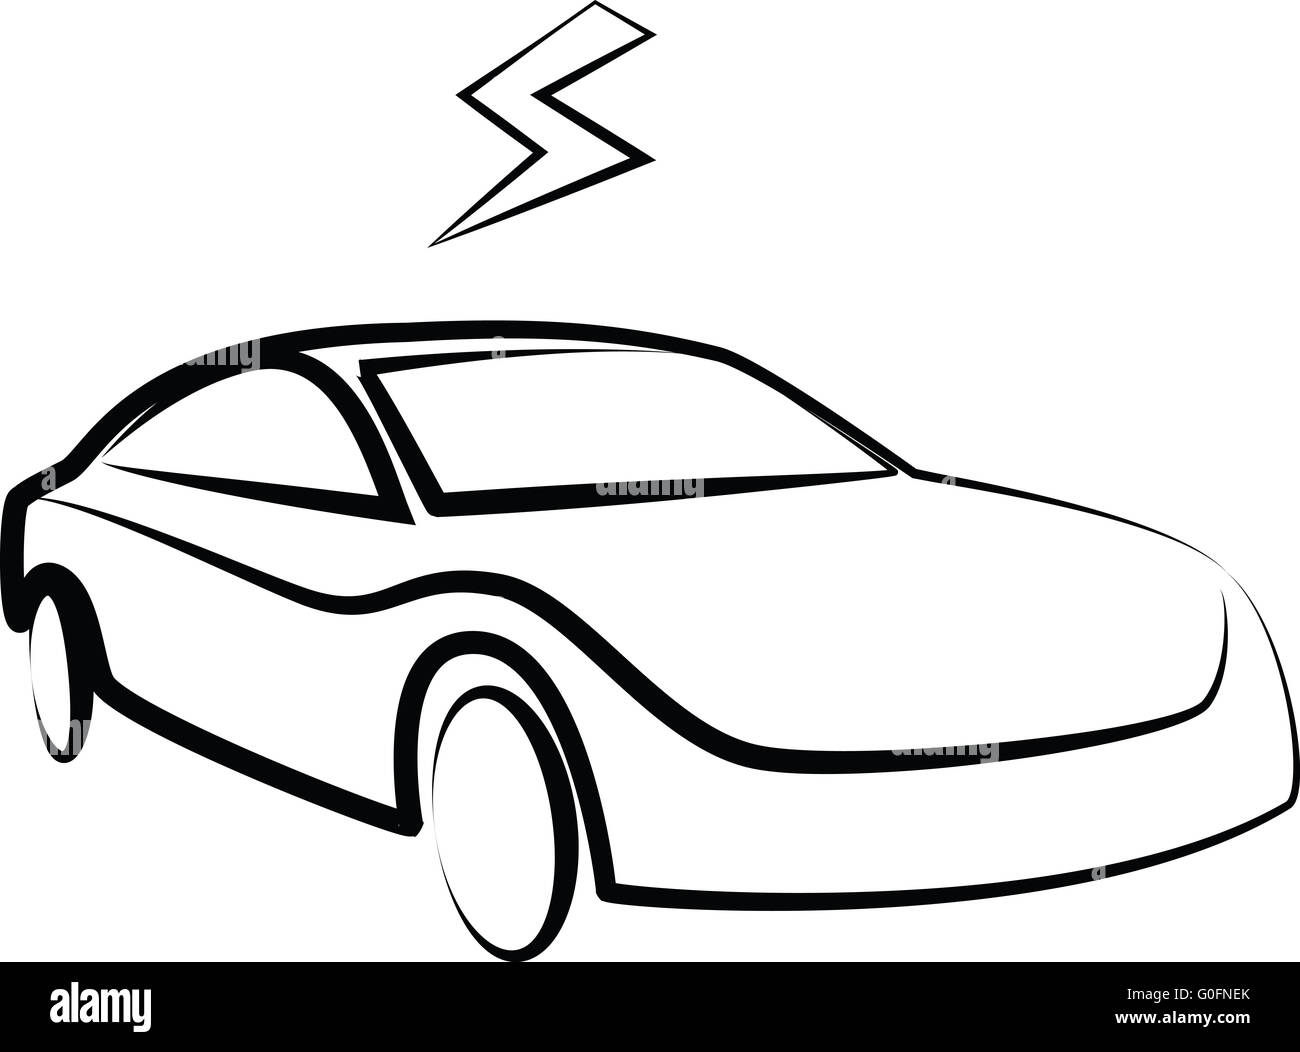 modern electric car silhouette. electric car illustration Stock ...